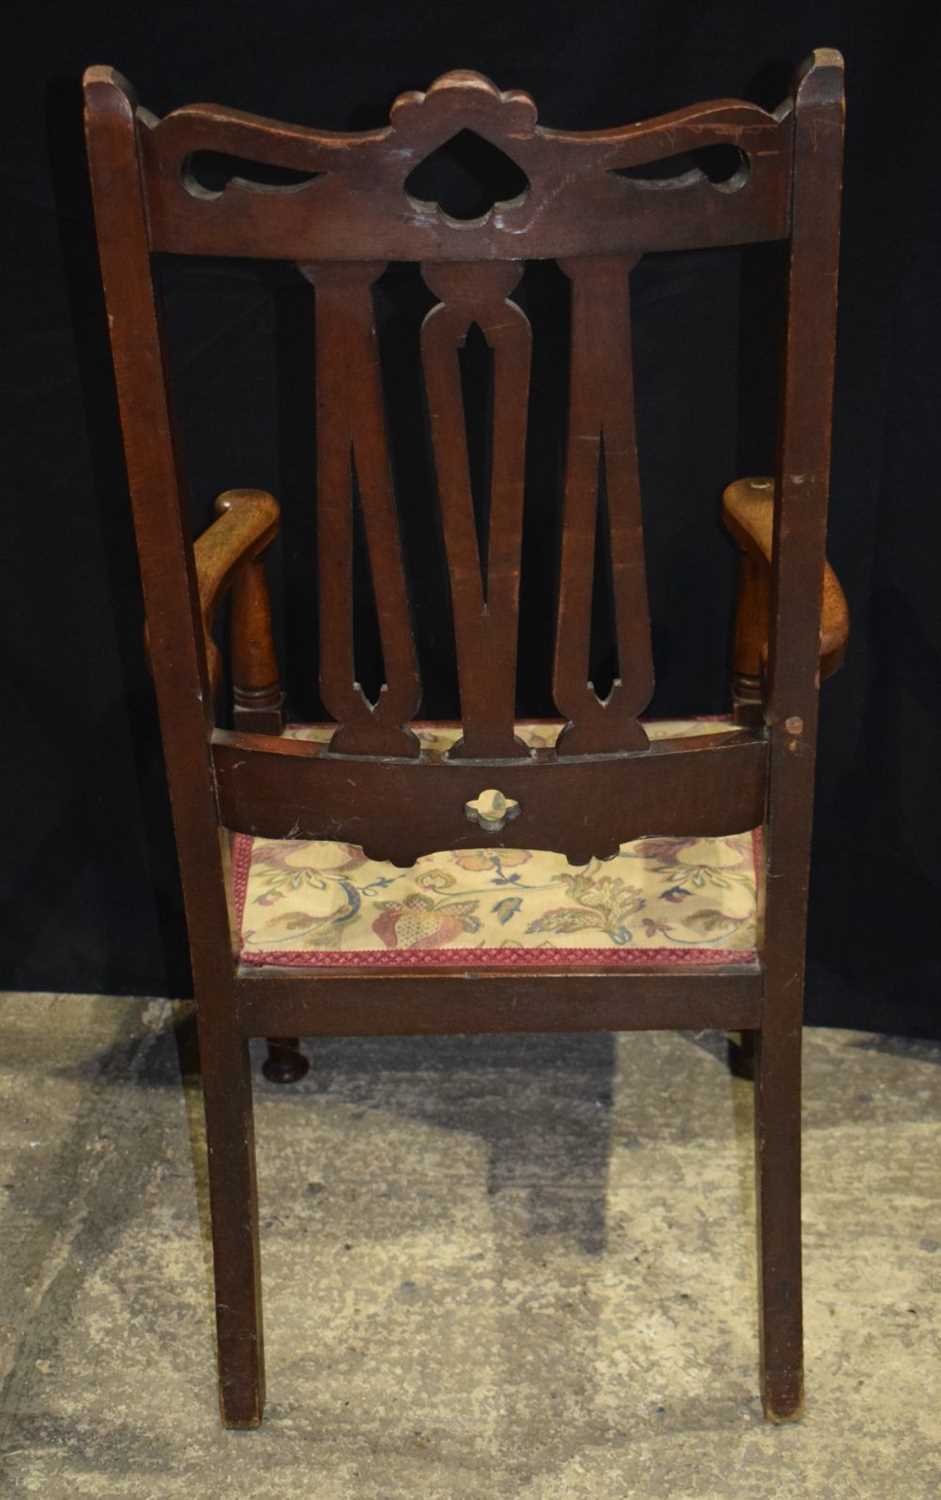 A large 19th Century Oak armchair with covered wooden seat 115 x 58 x 54 cm - Image 4 of 10